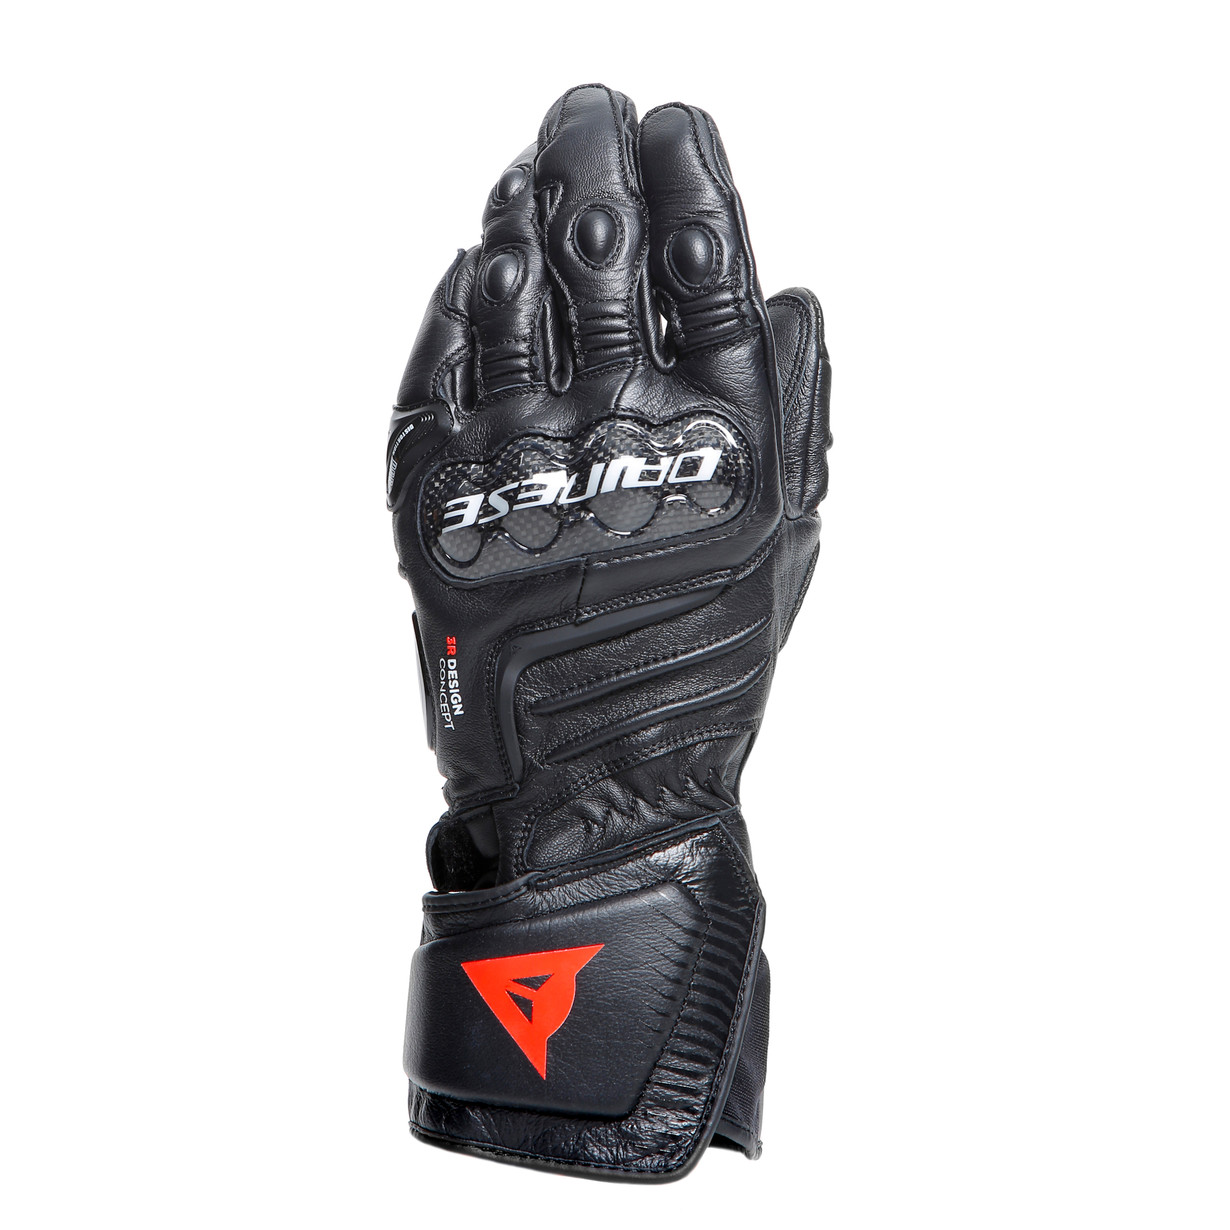 GUANTES DAINESE CARBON 4 LONG